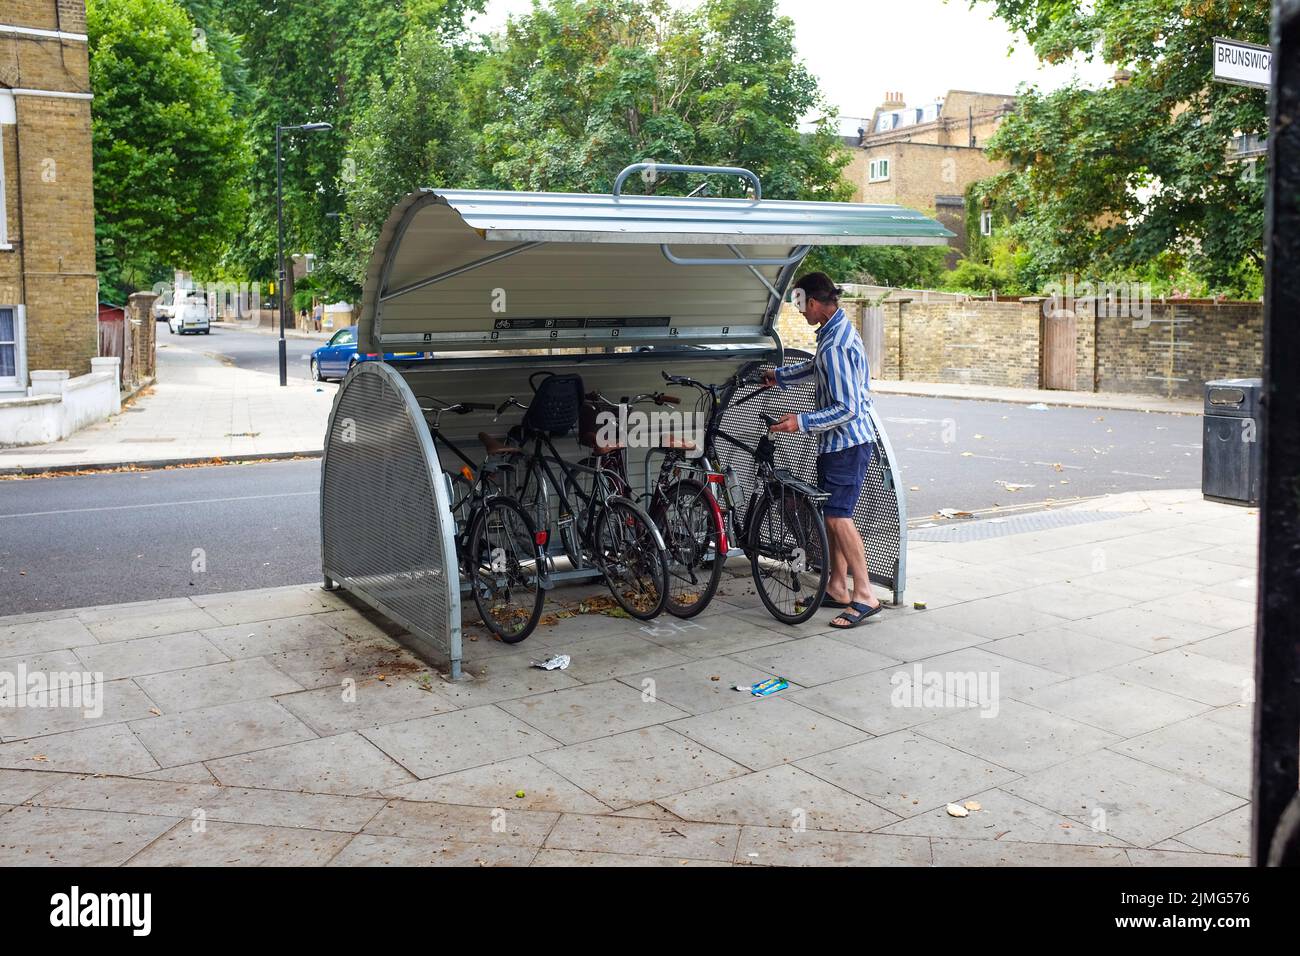 A cycle hangar for secure bicycle parking in London, England. Stock Photo